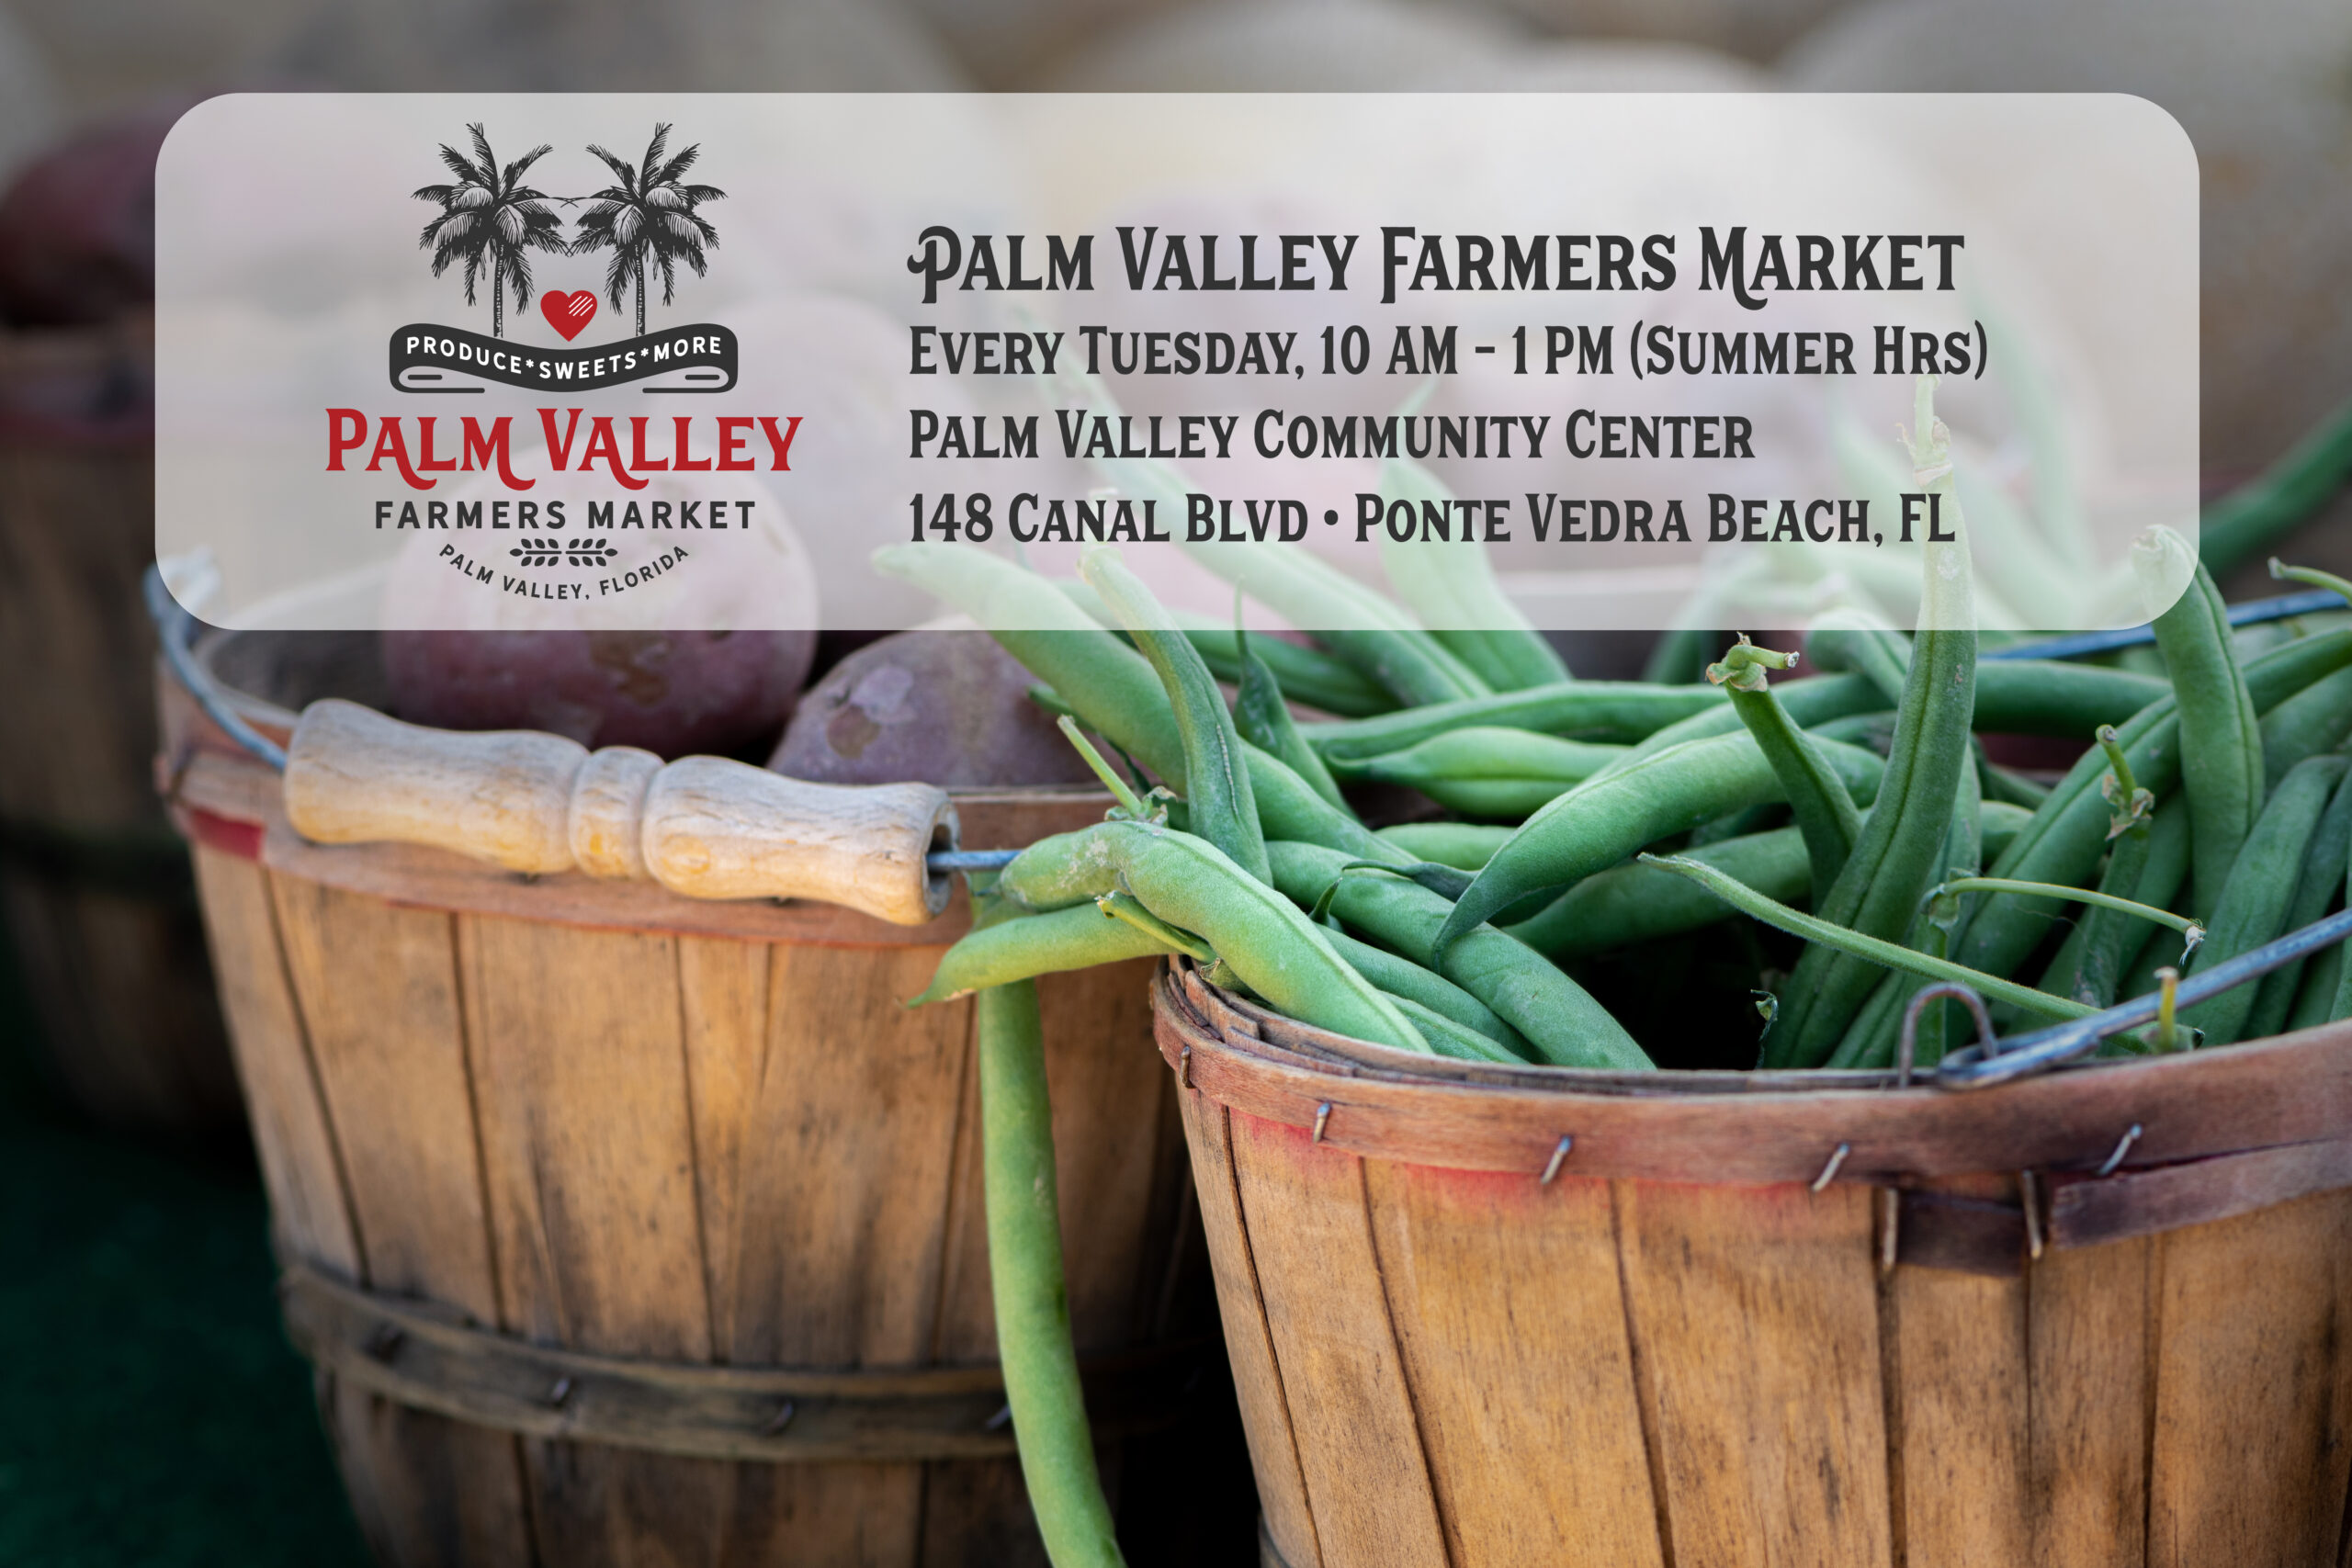 Palm Valley Farmers Market address and hours